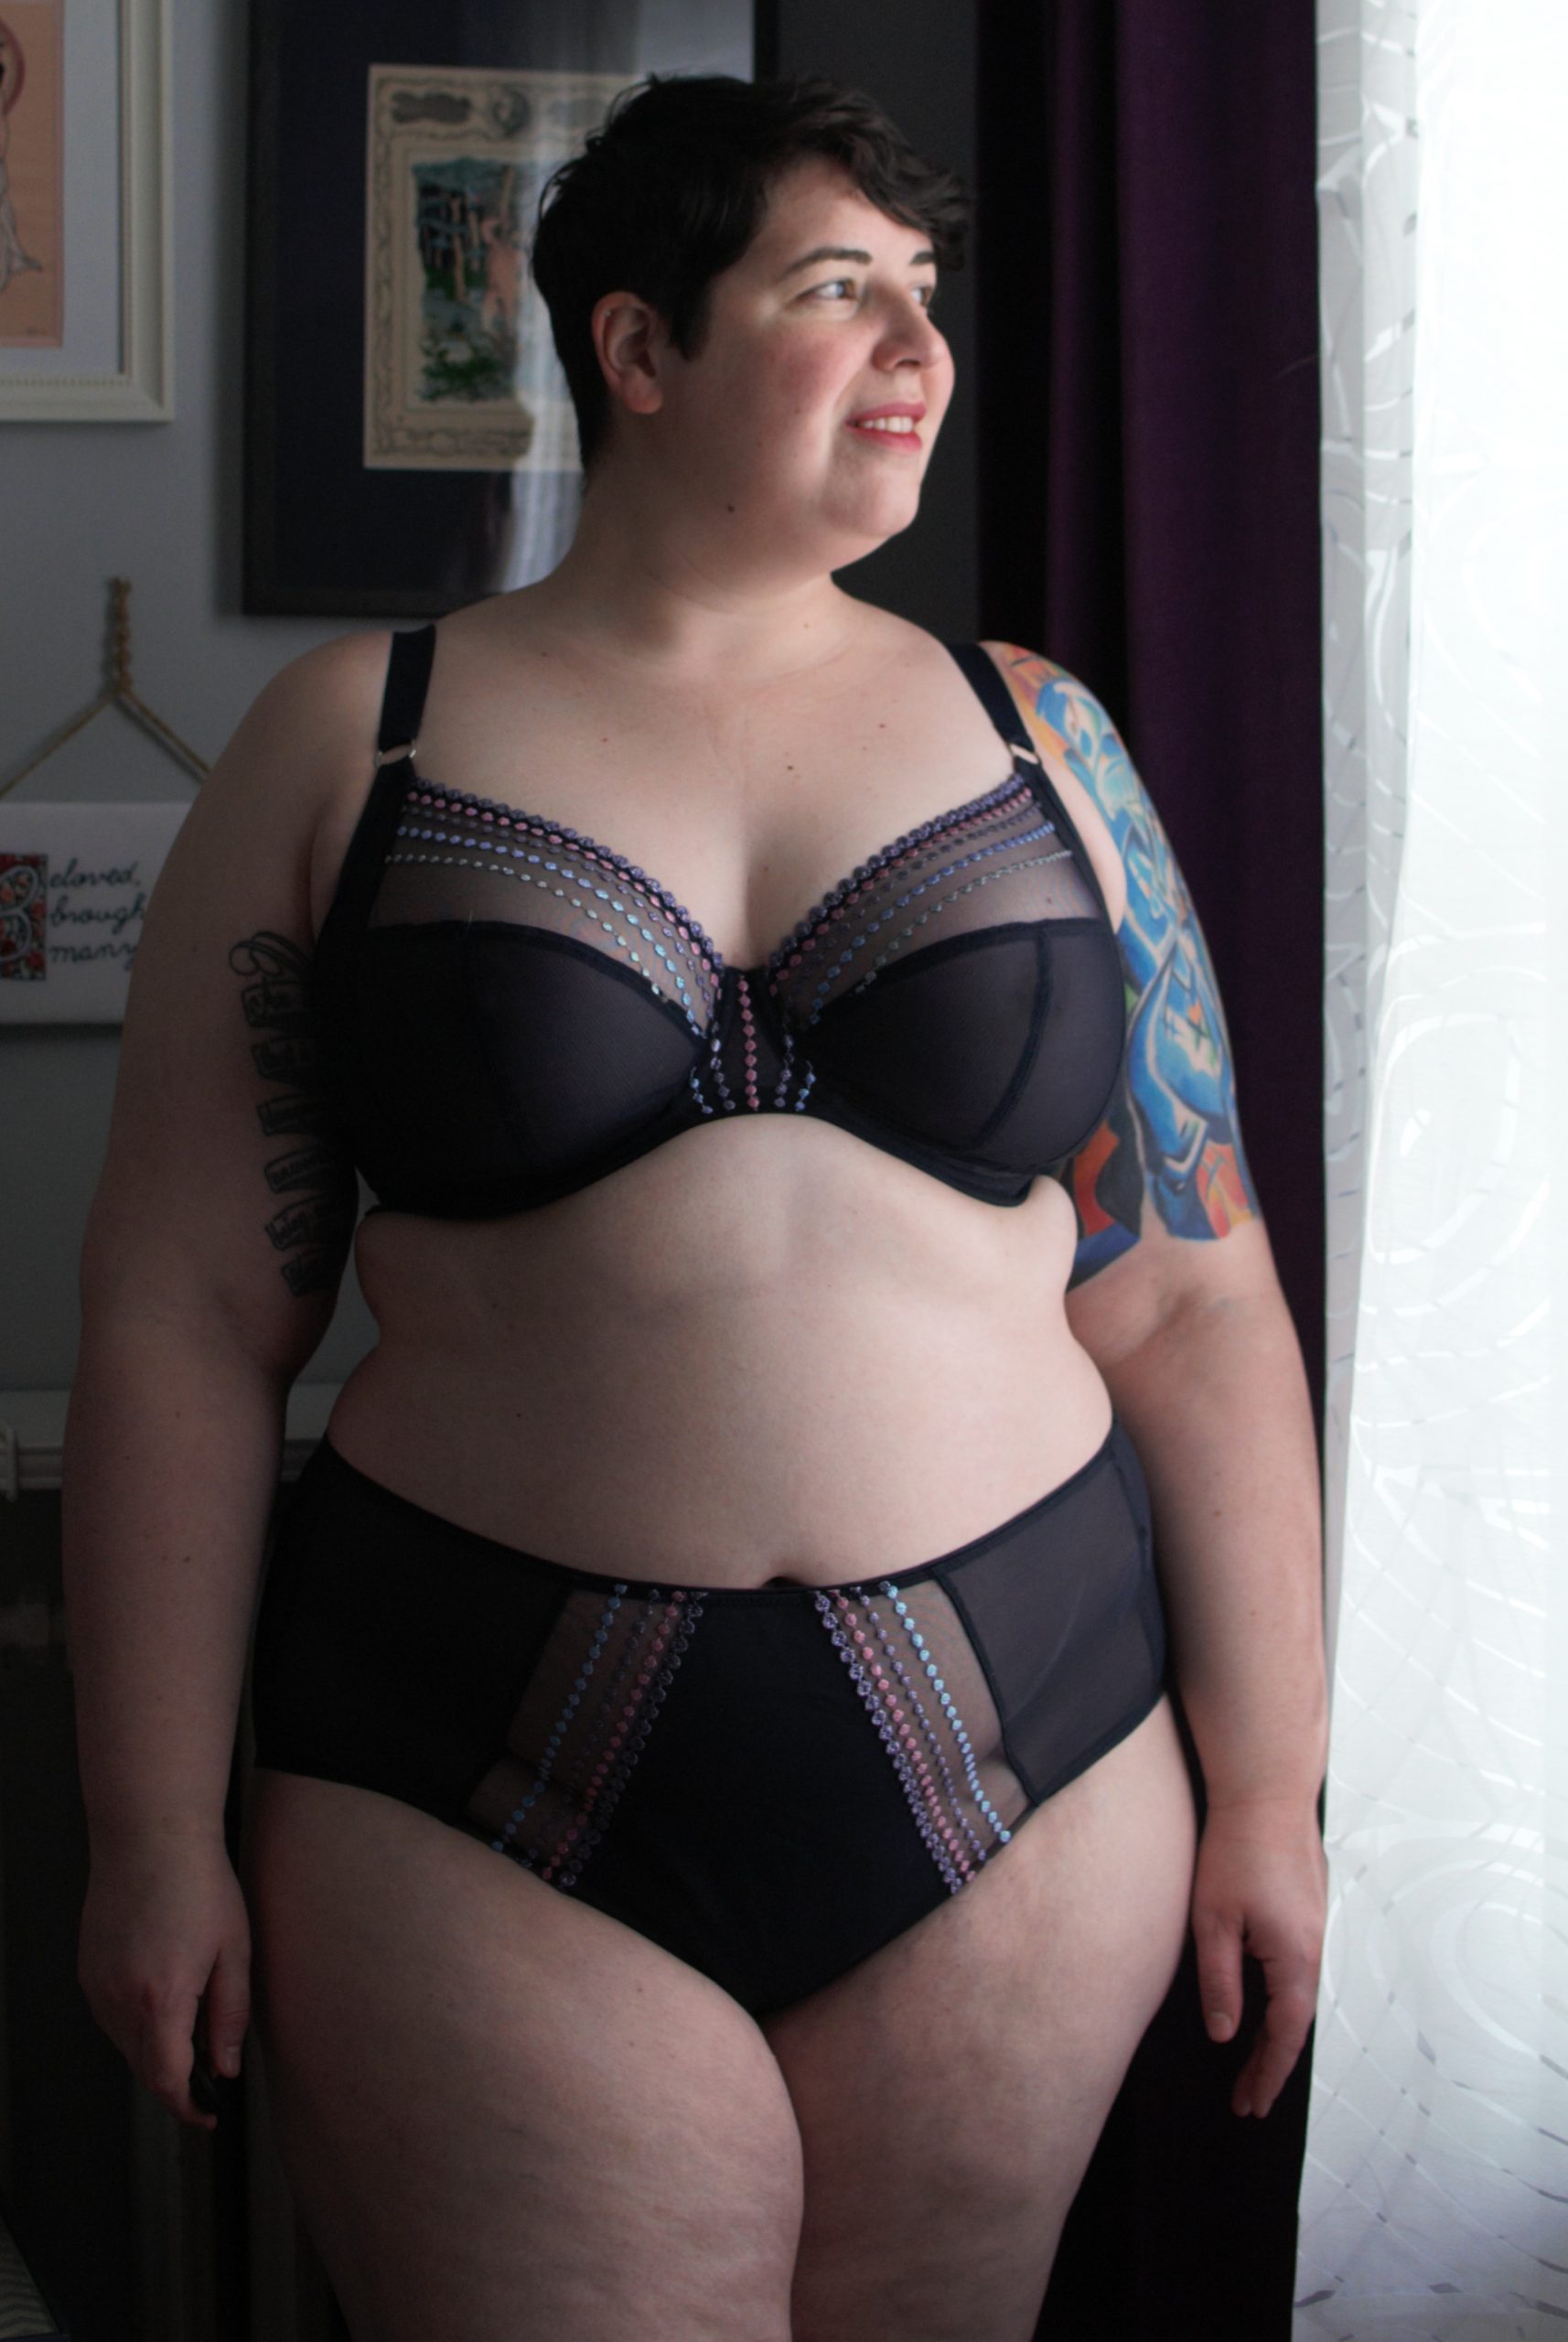 Sachi Black Butterfly Plunge Bra from Elomi